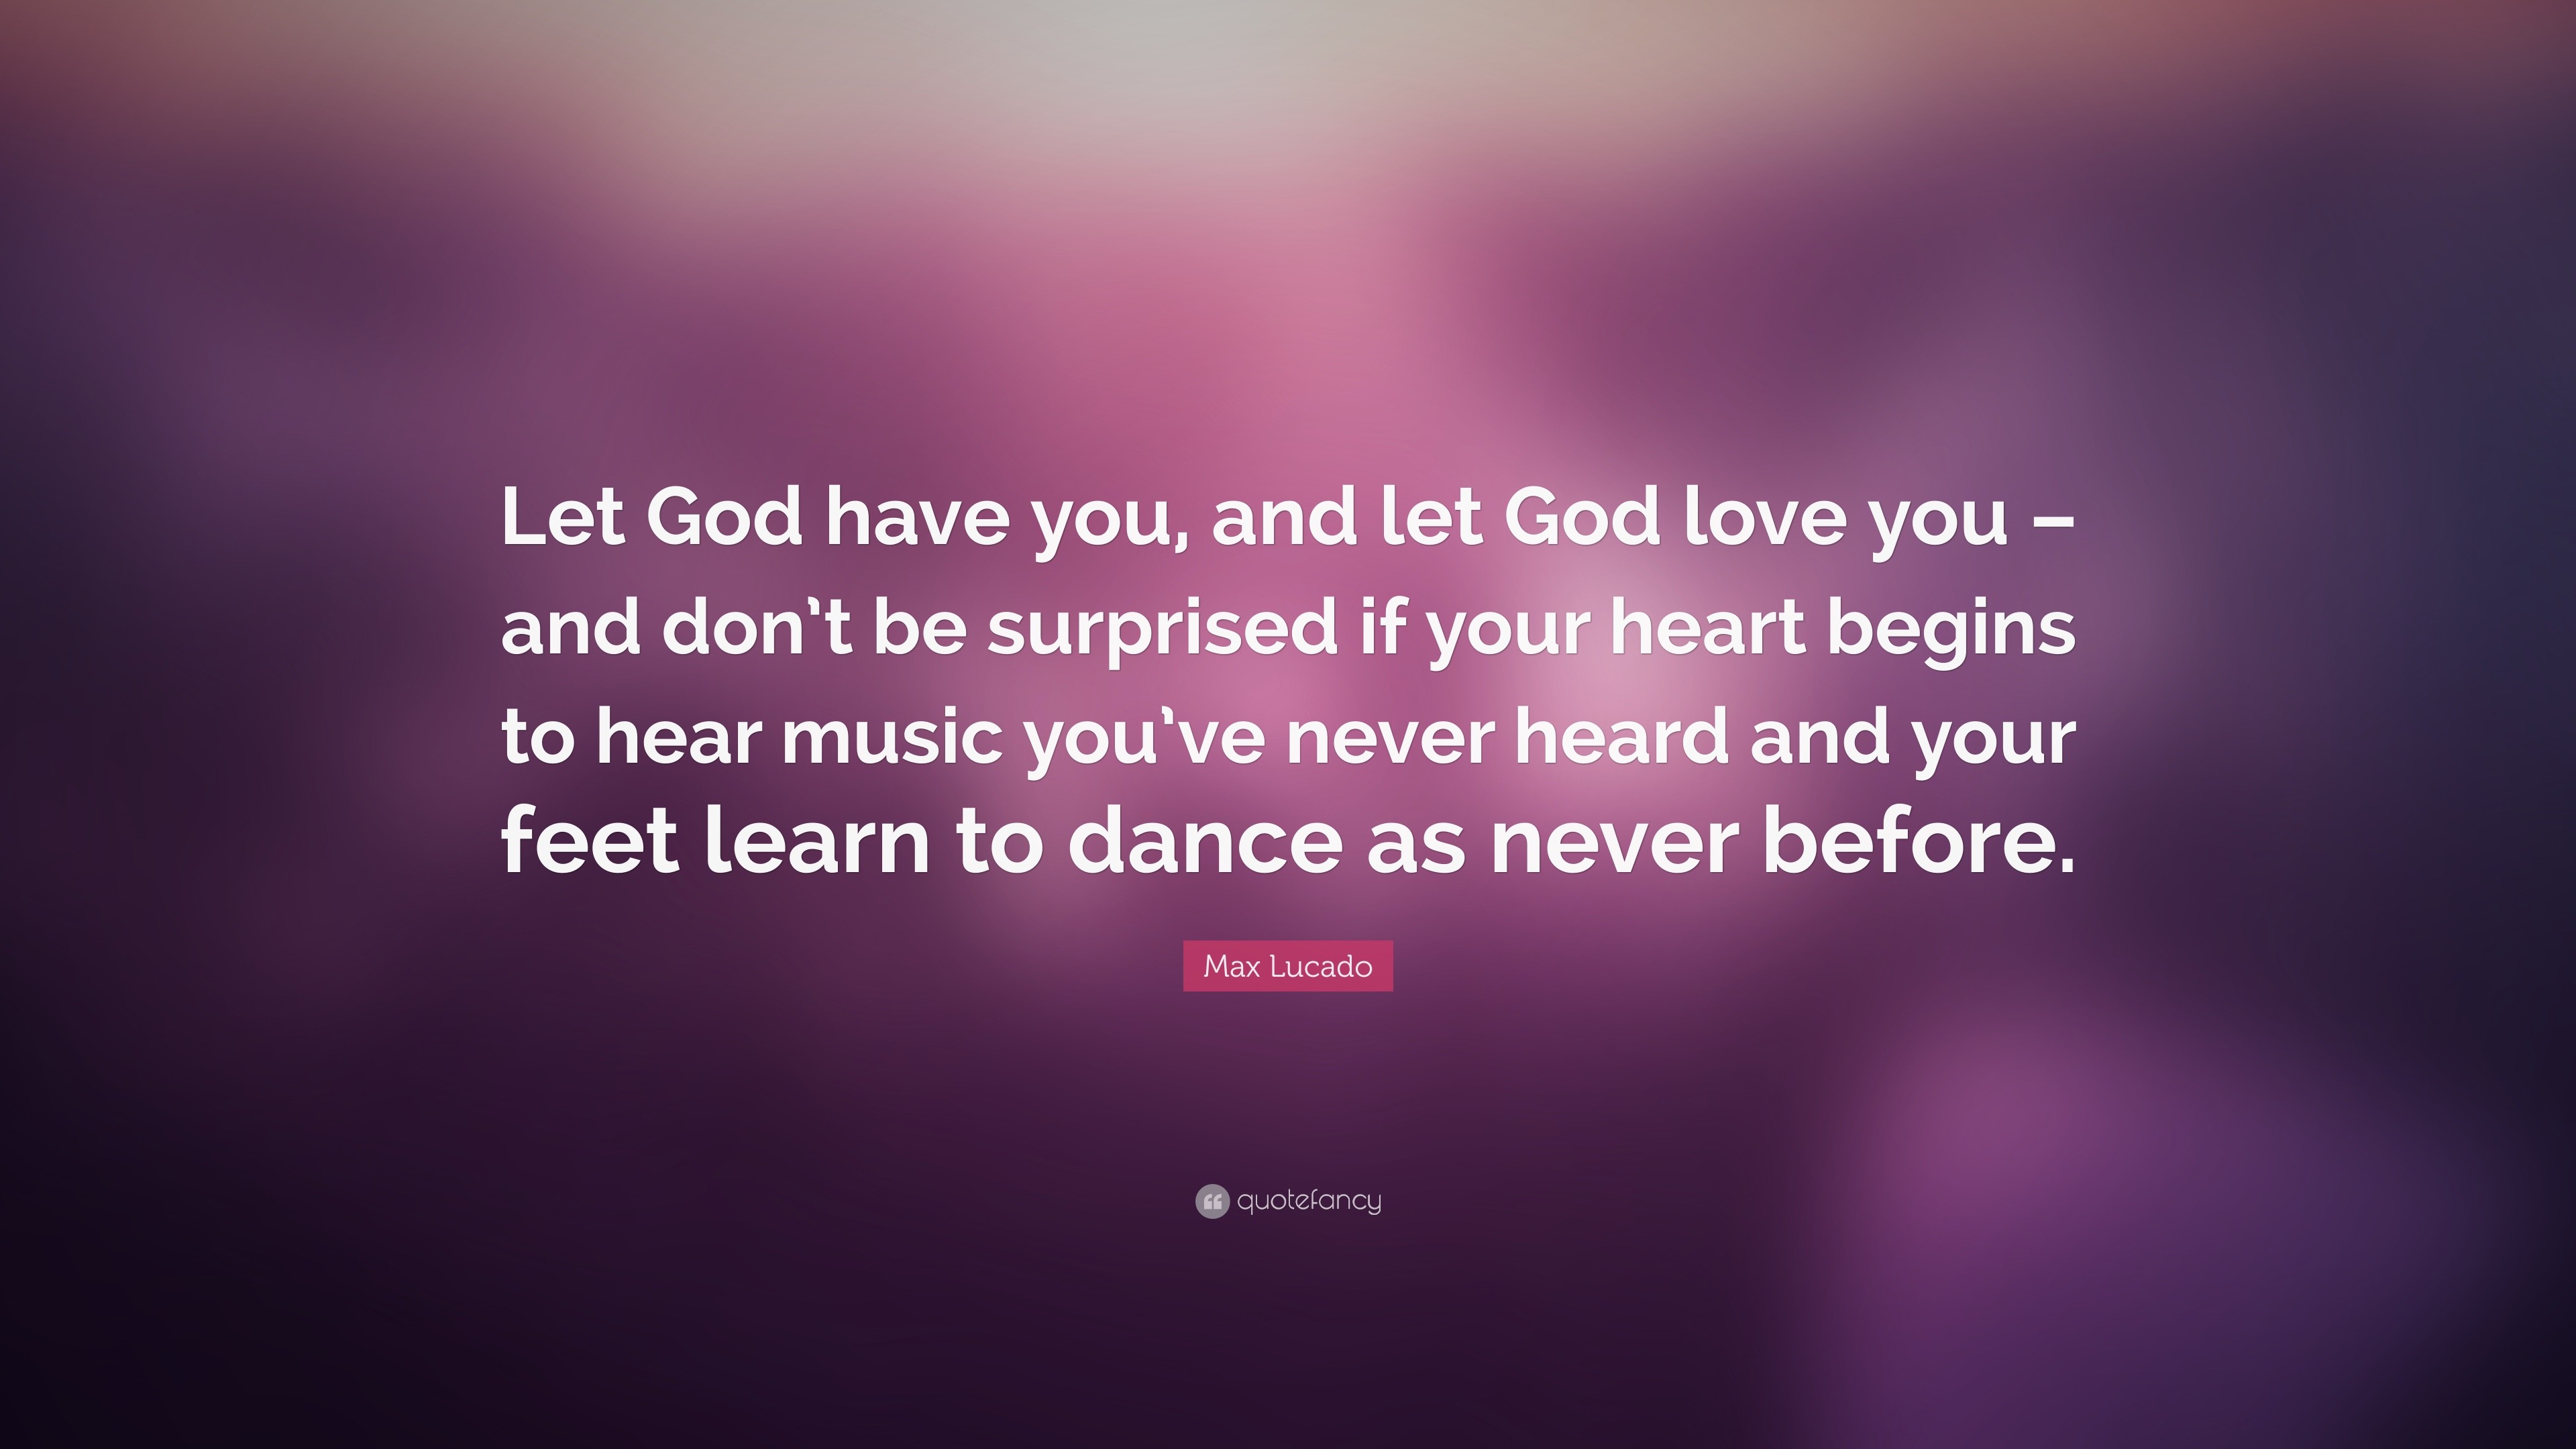 Max Lucado Quote “Let God have you and let God love you –